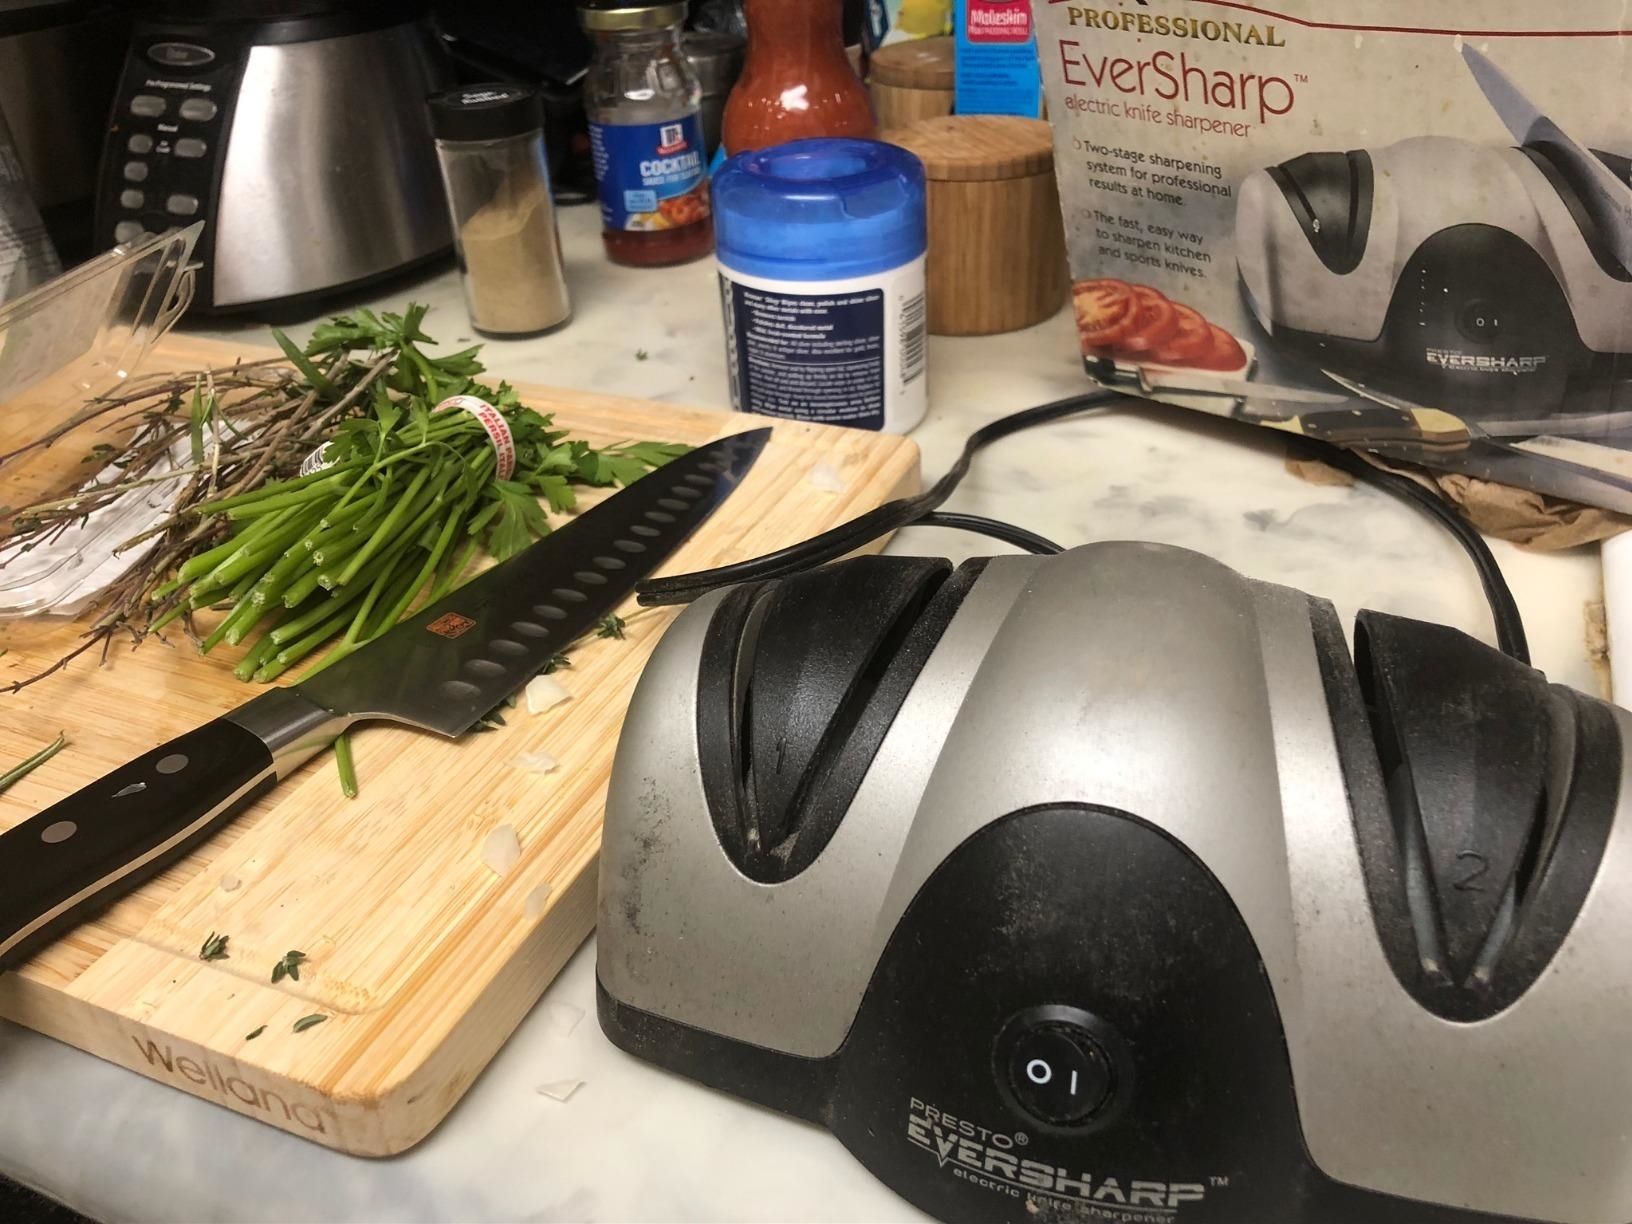 Reviewer image of the sharpener next to a cutting board with a knife